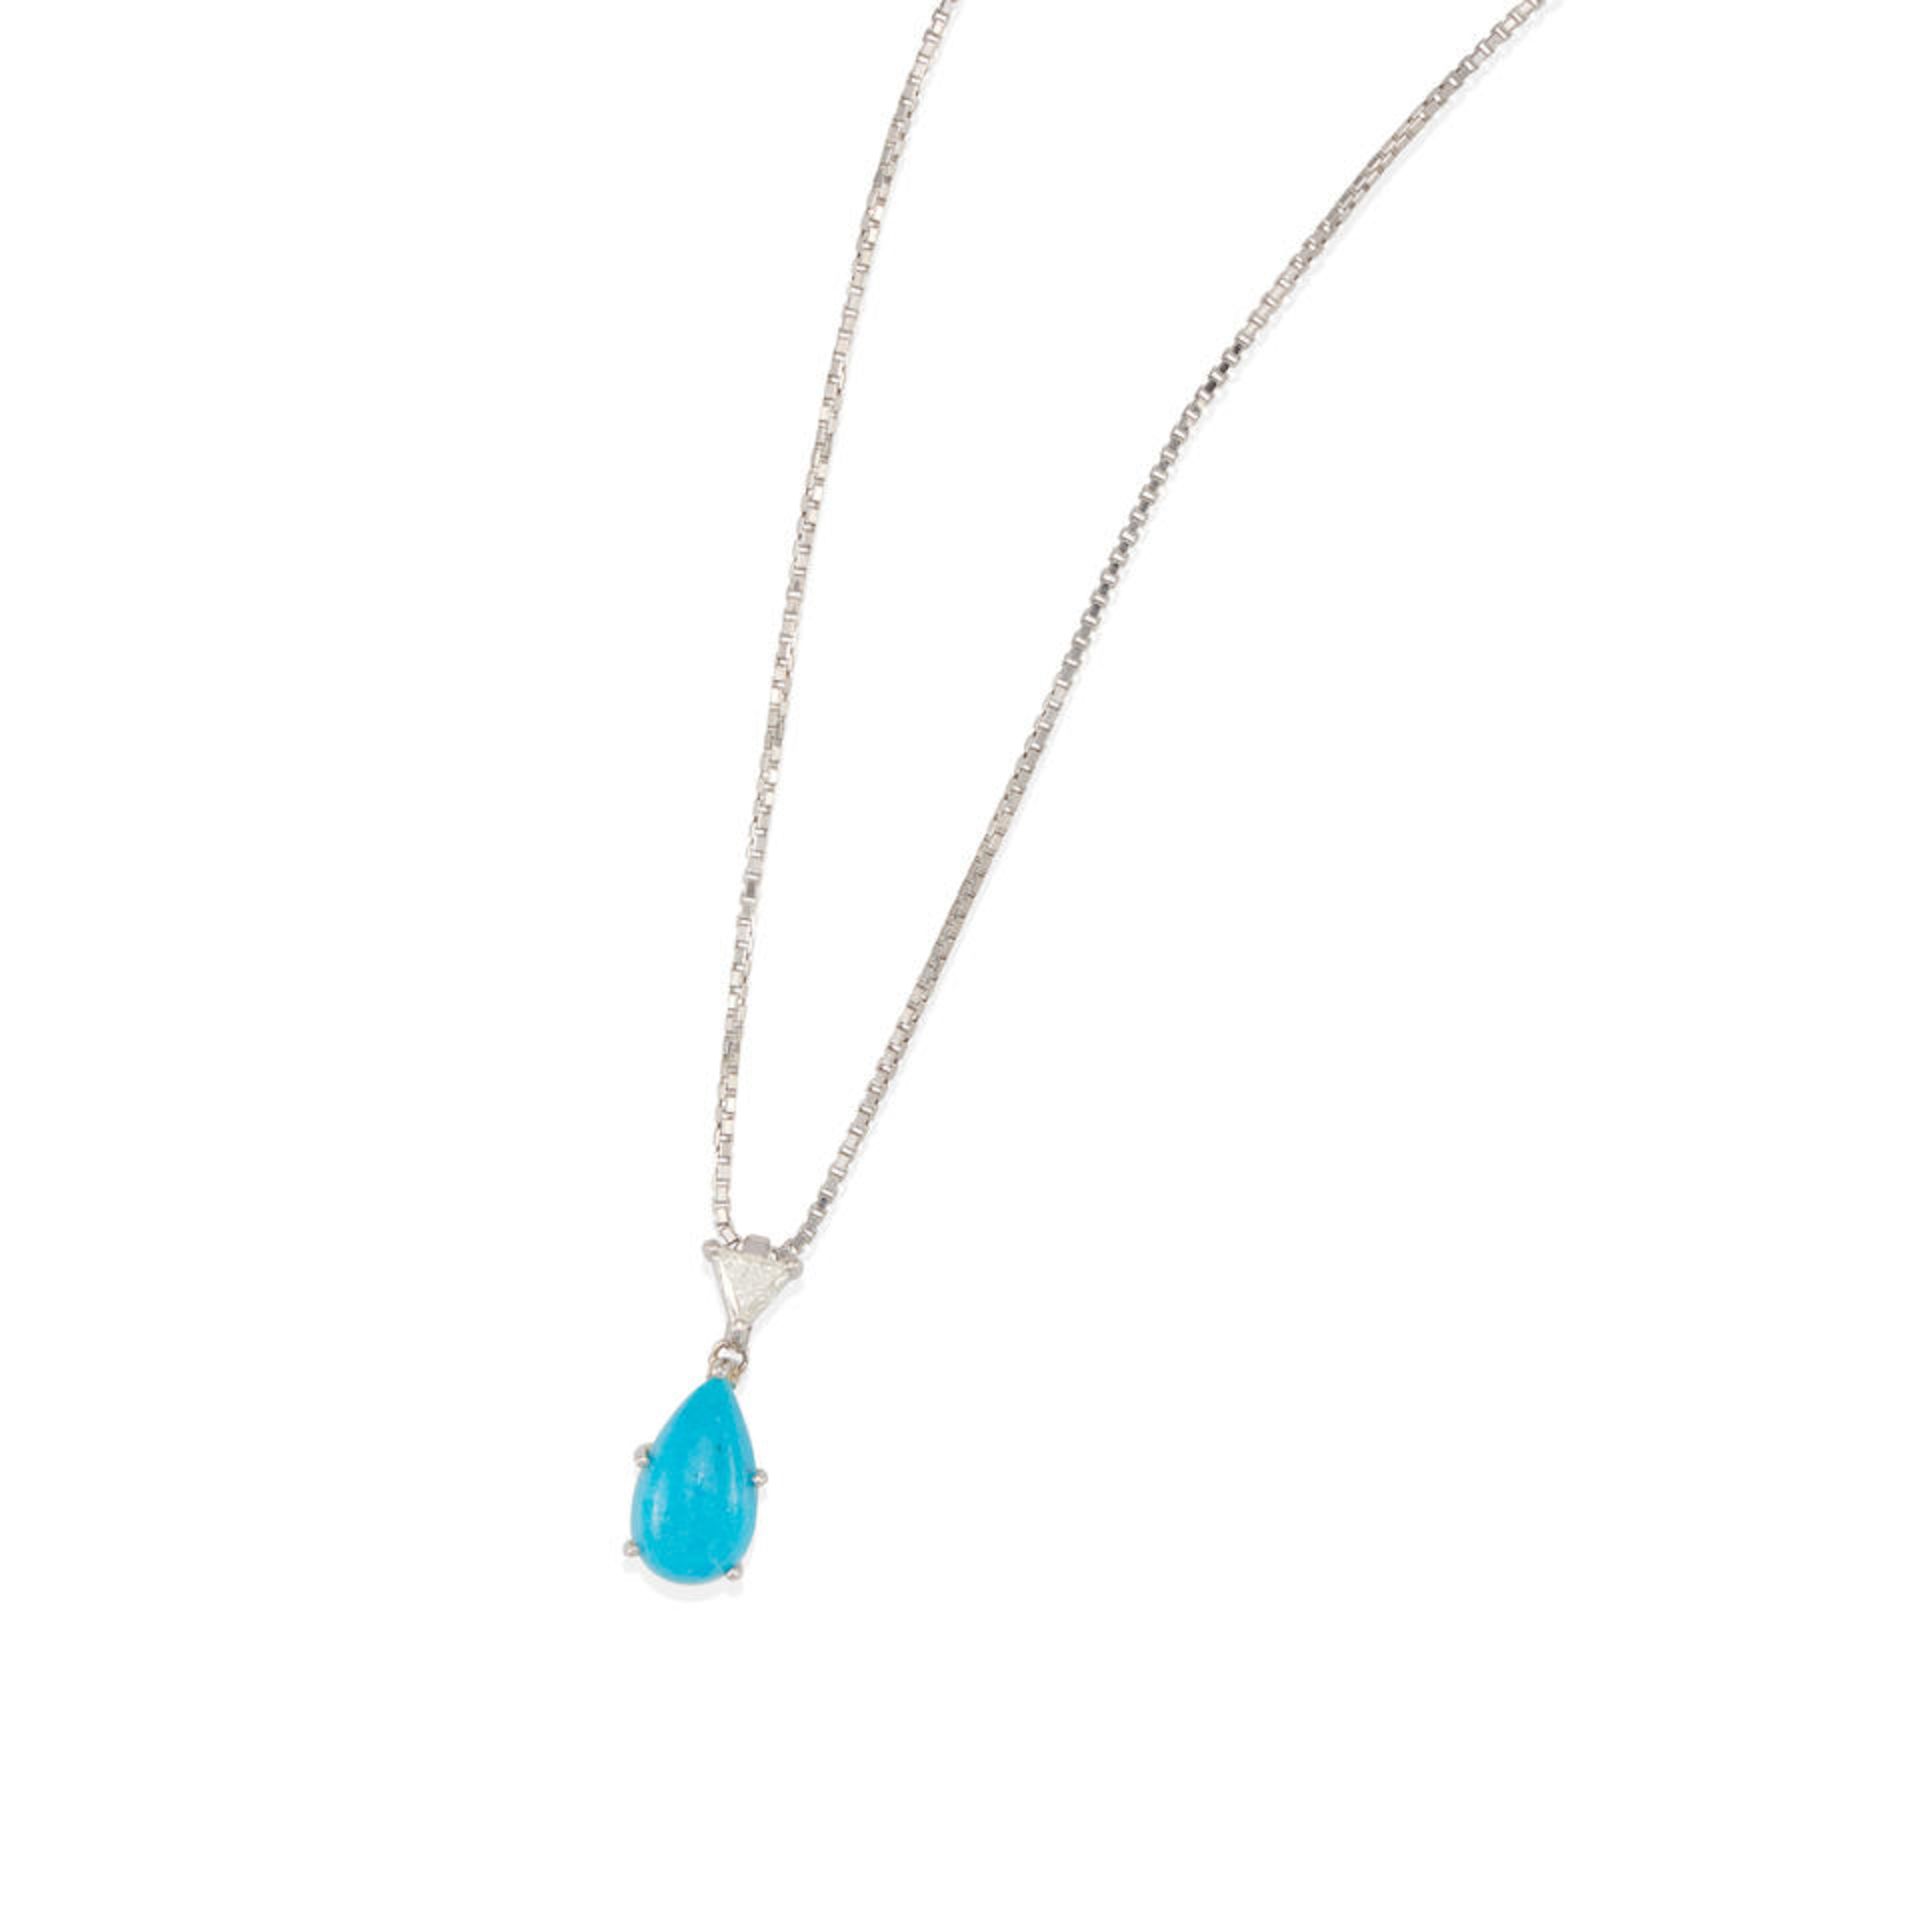 A PLATINUM, TURQUOISE AND DIAMOND PENDANT NECKLACE